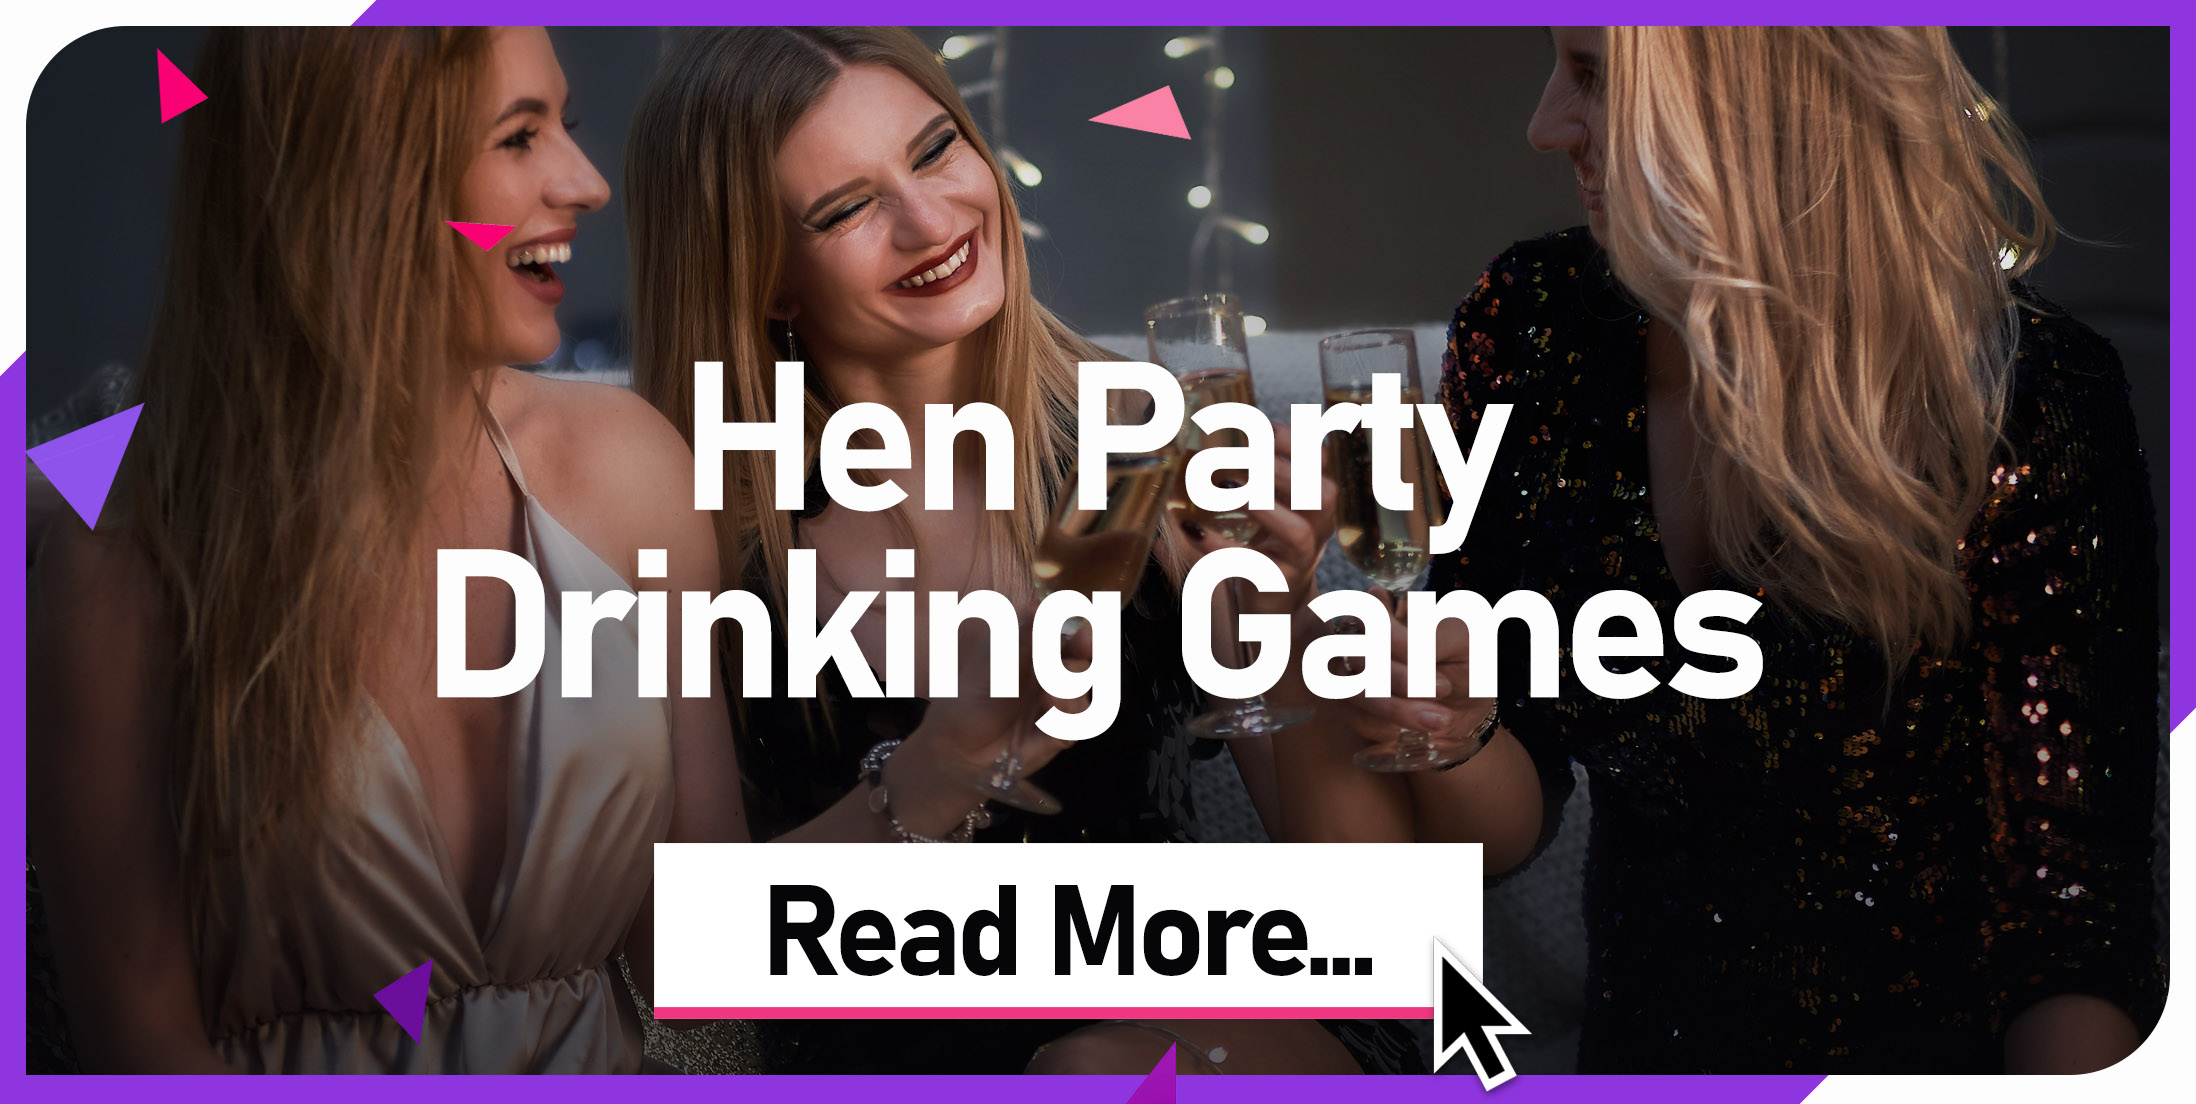 Hen Party Drinking Games